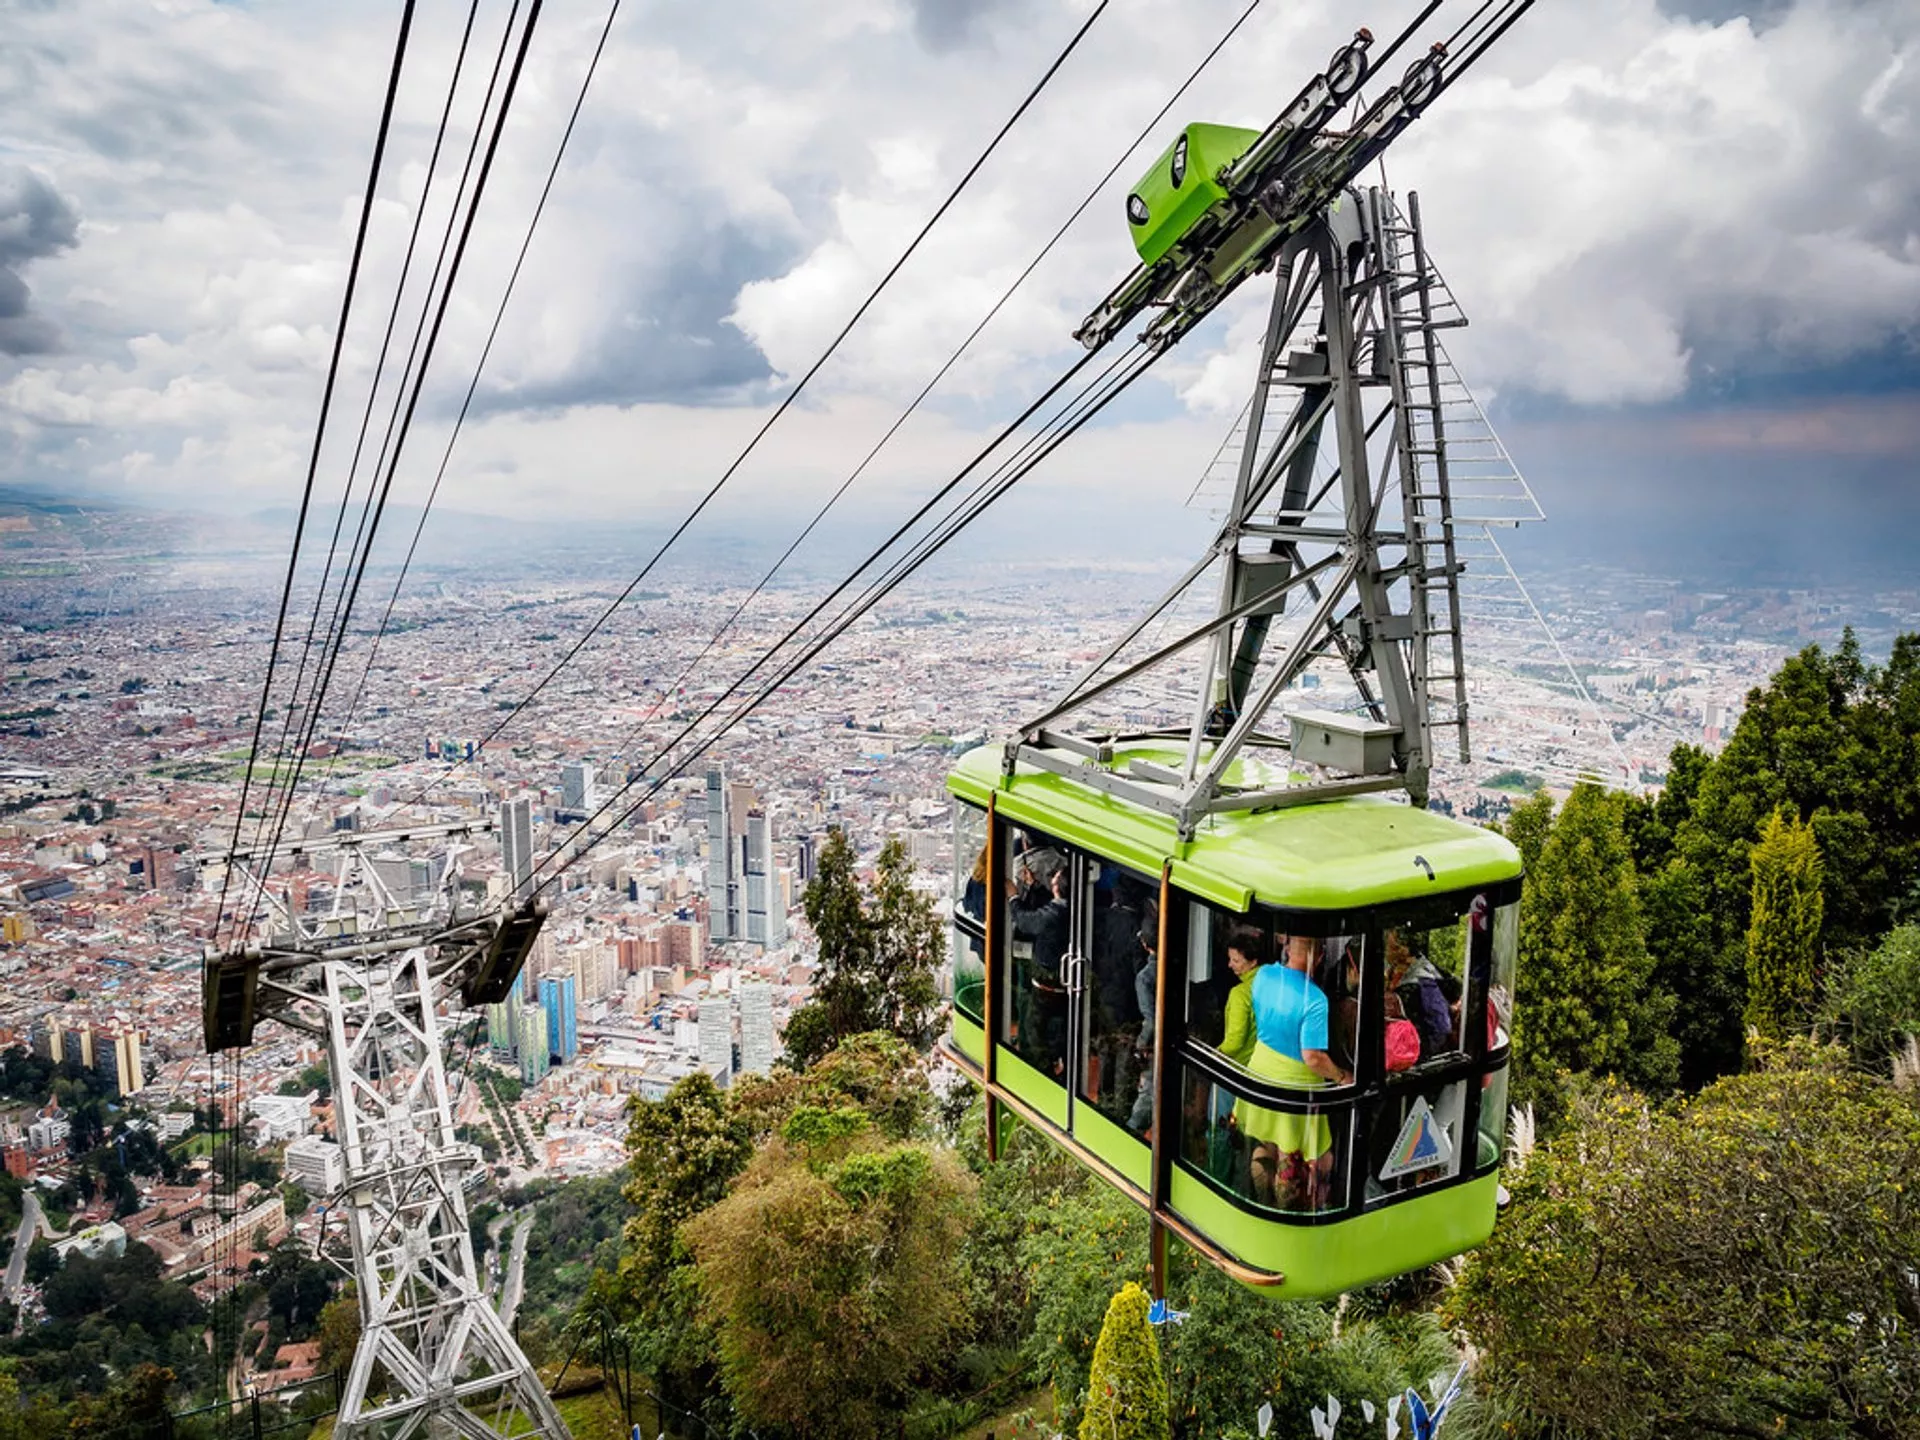 Monserrate Cable Car and Funicular in Colombia, South America | Cable Cars - Rated 3.9